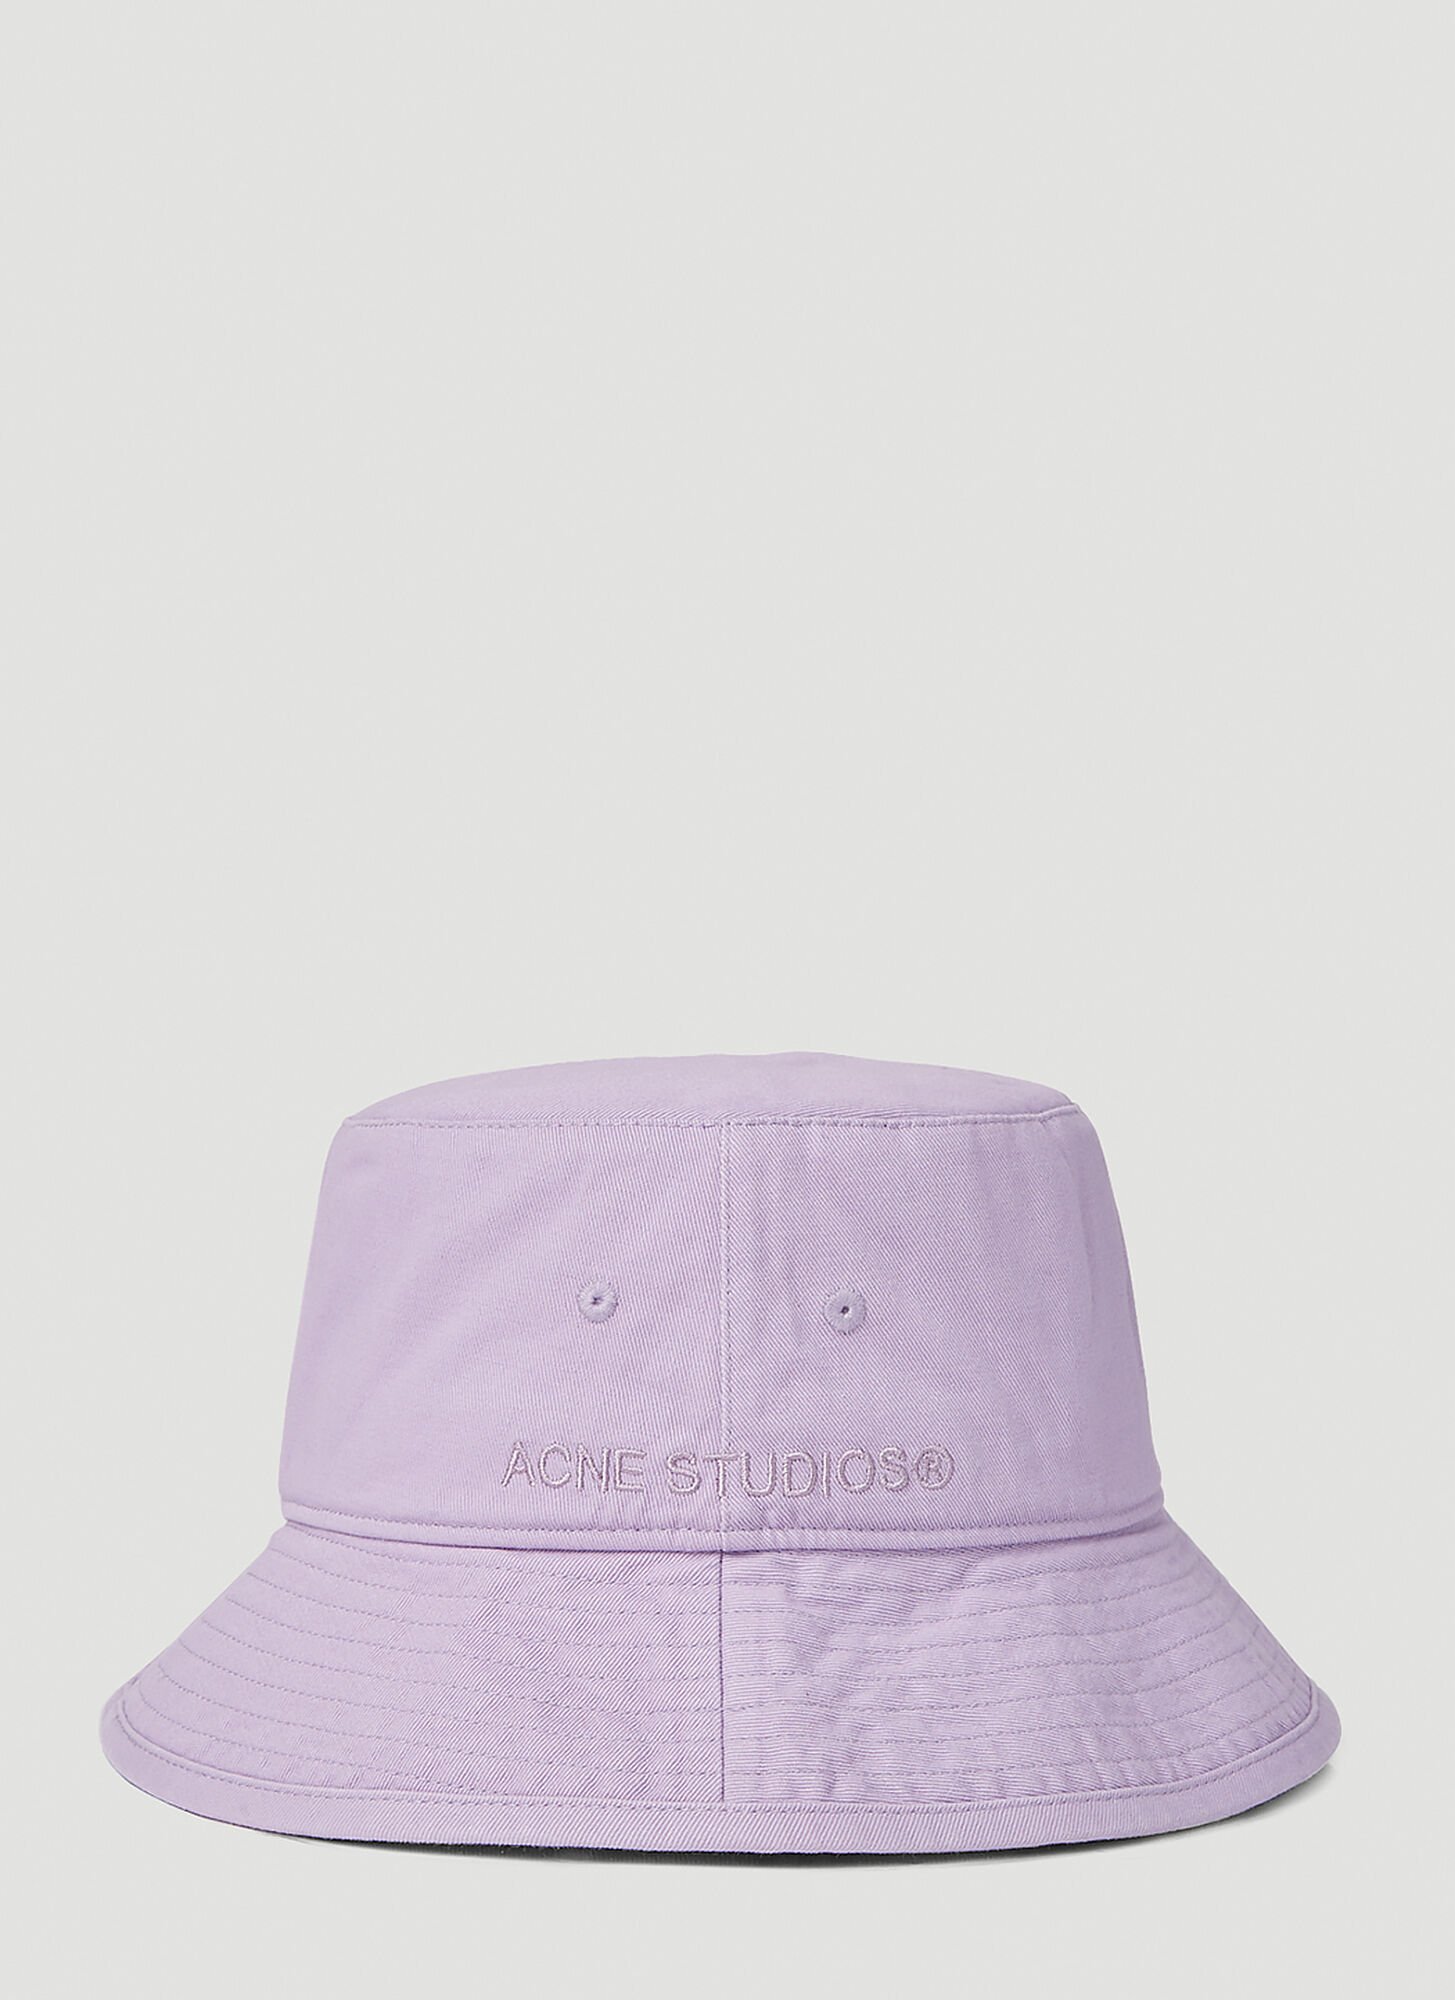 Acne Studios Embroidered Logo Bucket Hat In Lilac